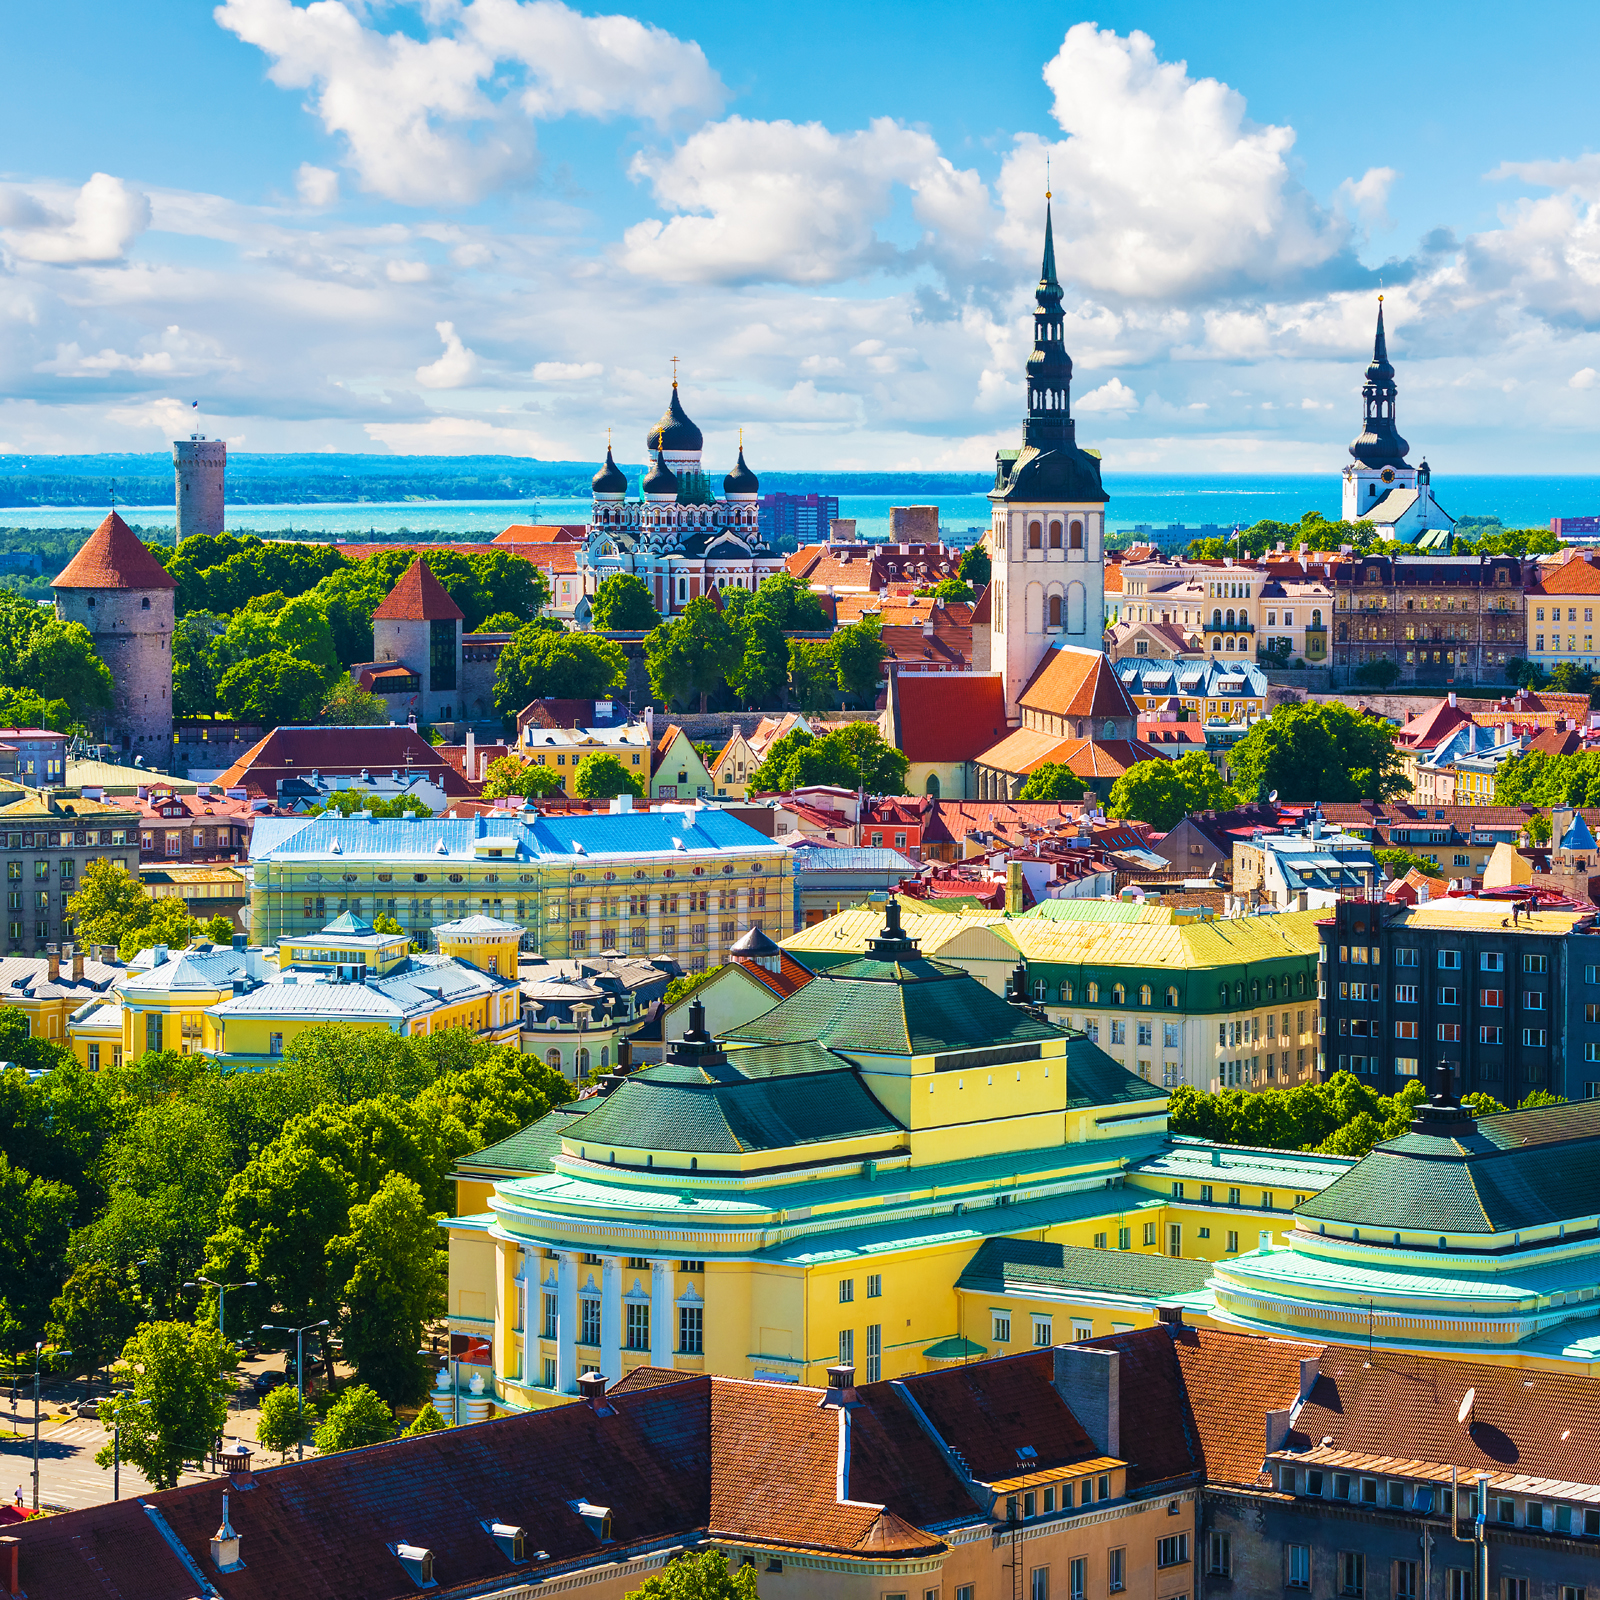 Bitcoin Payments Are on the Rise in the Baltics